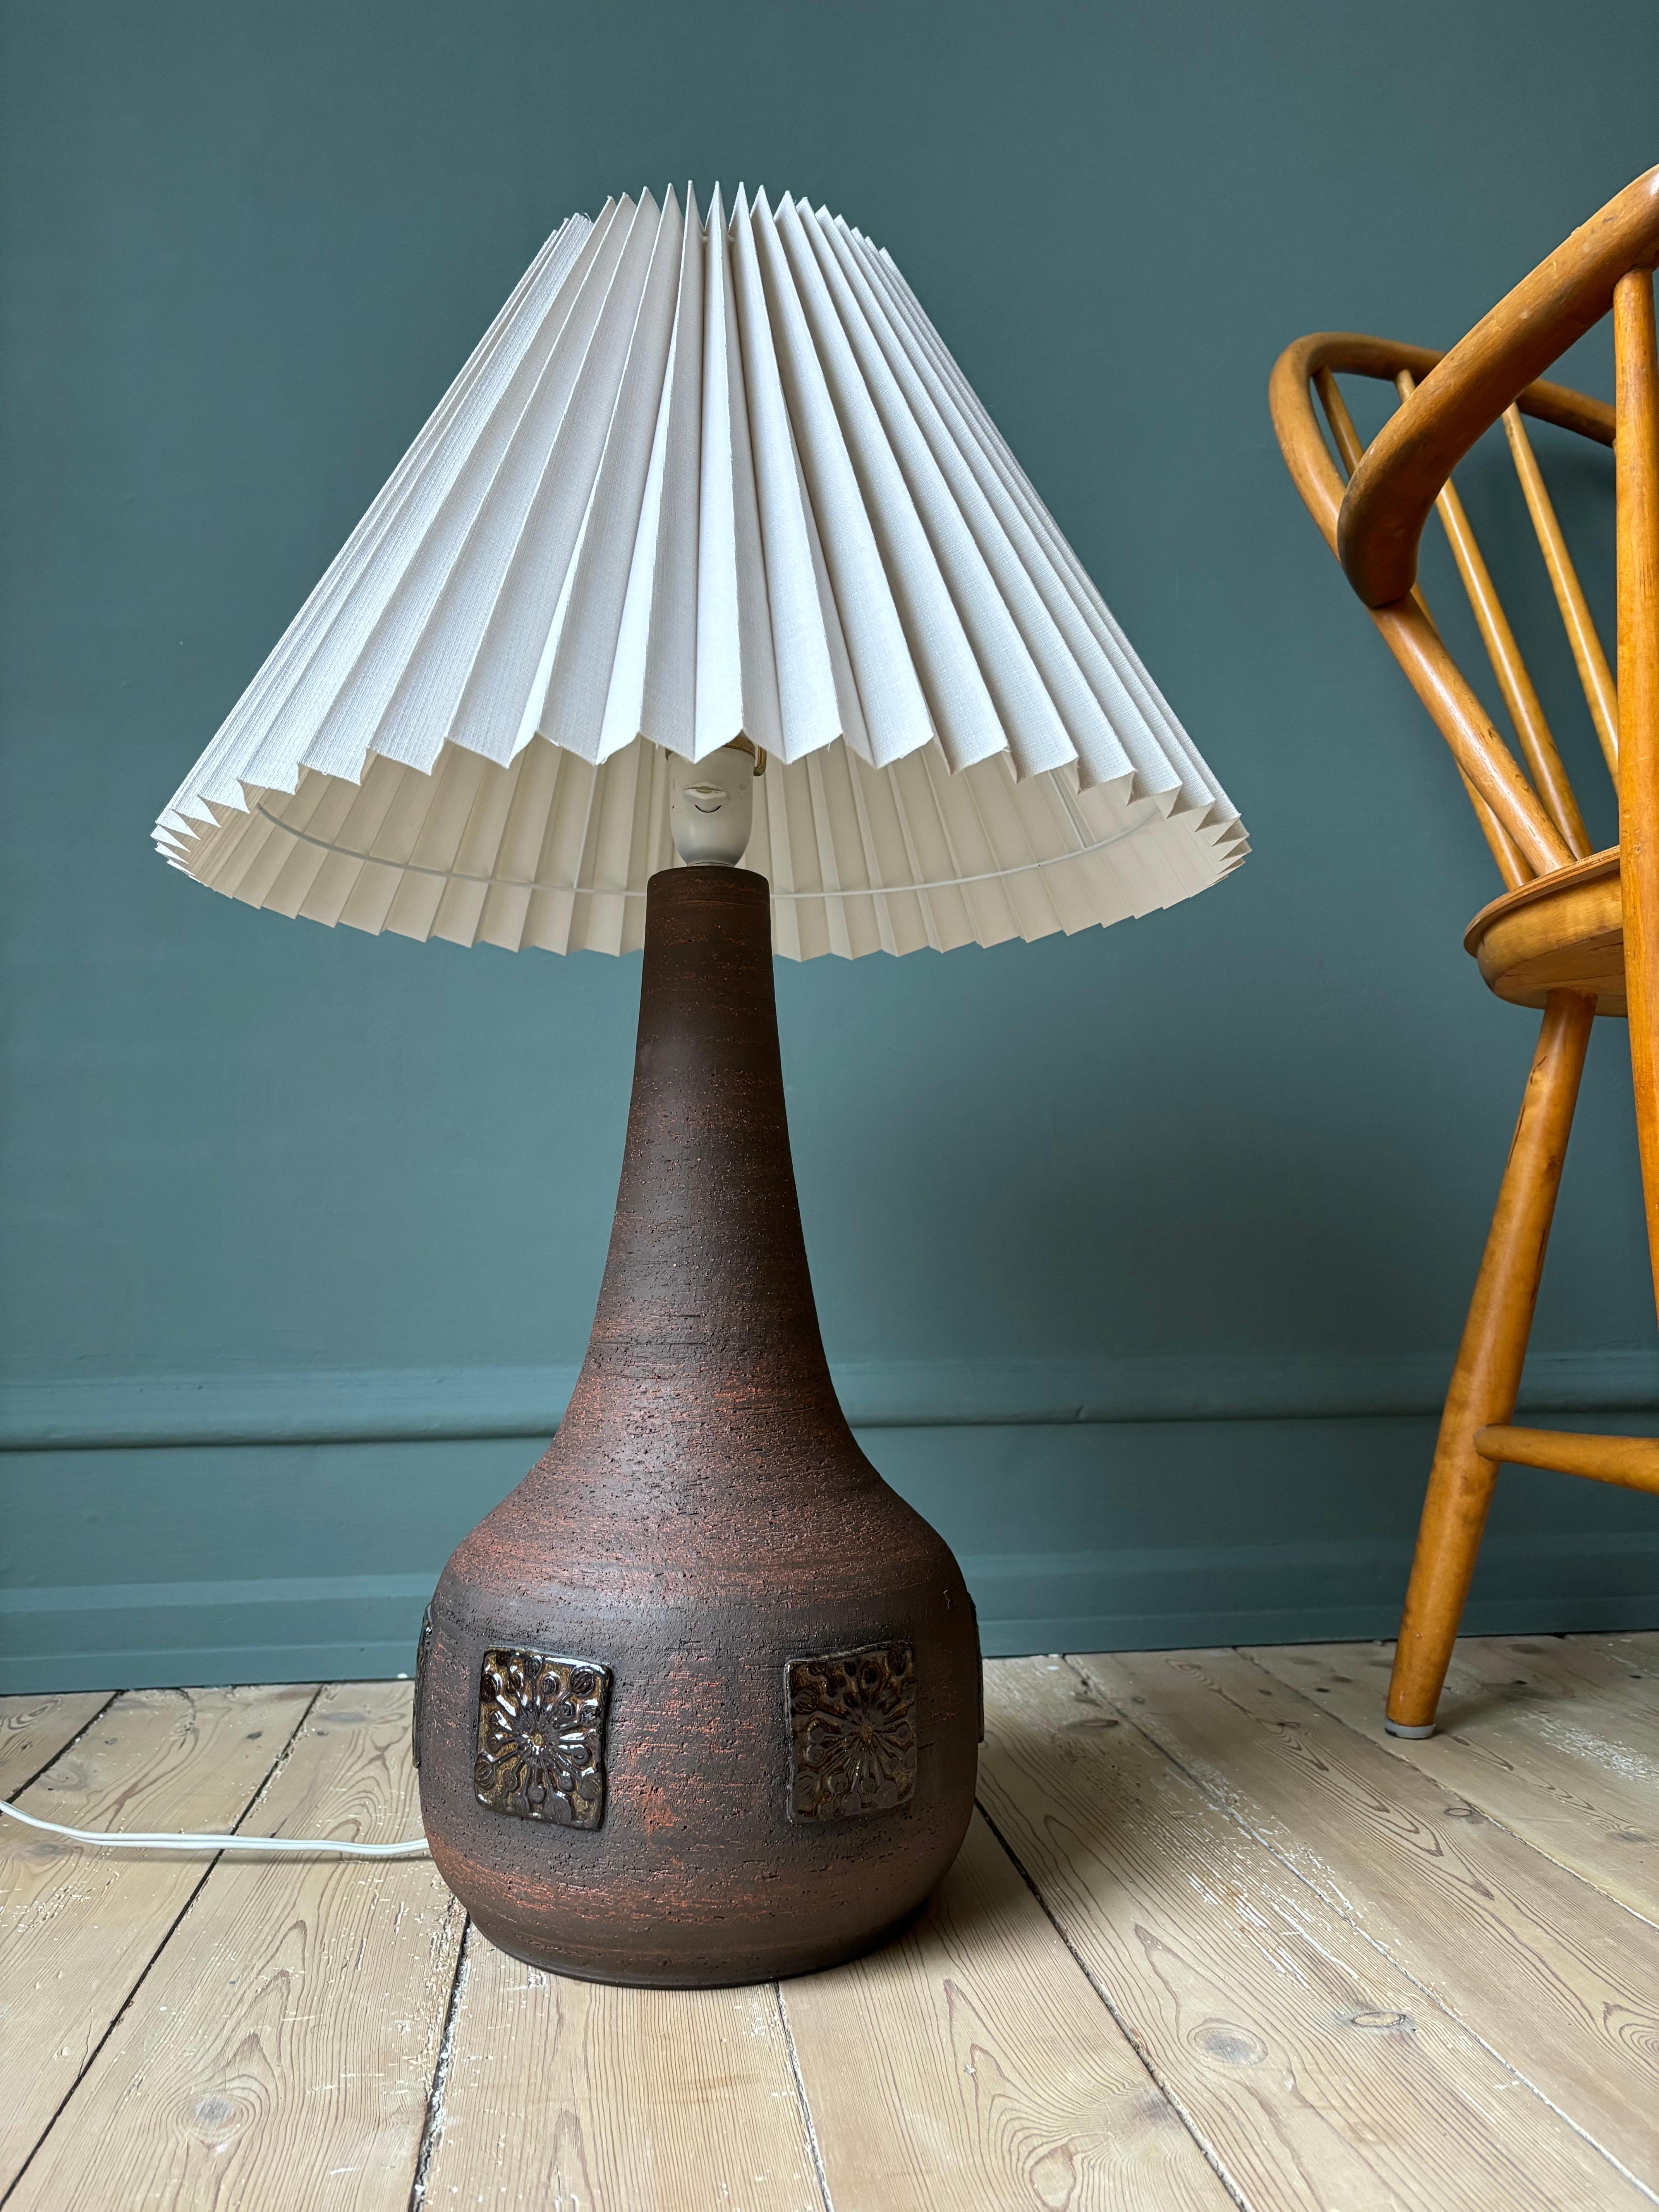 Large handmade modern brutalist stoneware lamp by Belka Stentøj in the 1960s. Raw and unglazed brown chamotte clay material with glazed squares of stylized floral decorations around the large belly. A tall rustic piece that can be used as a table